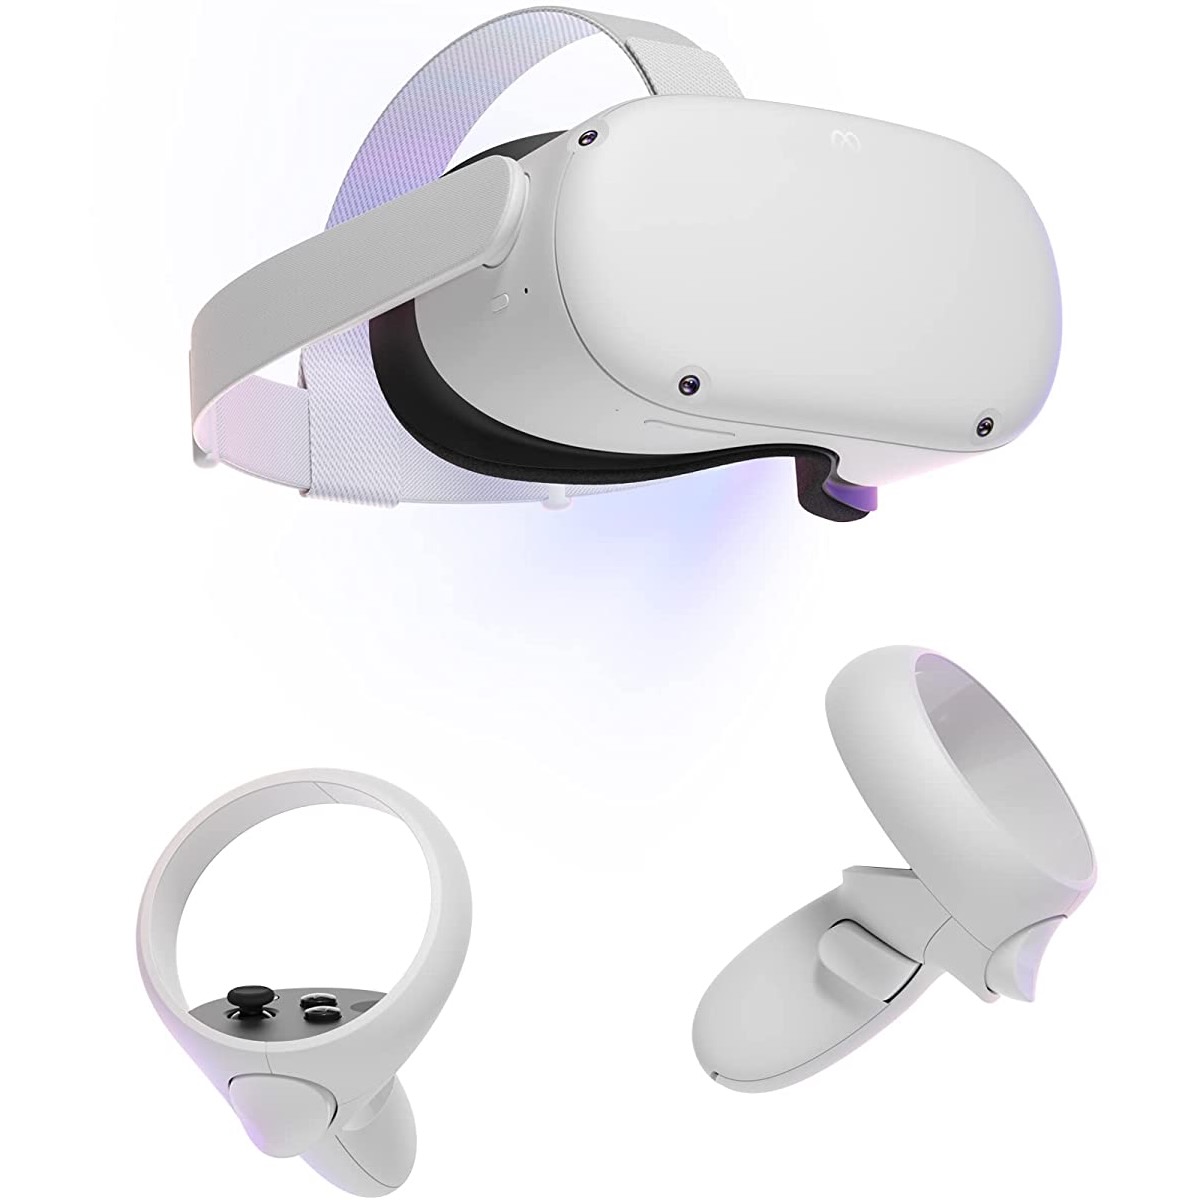 Oculus Quest 2 with Touch controllers